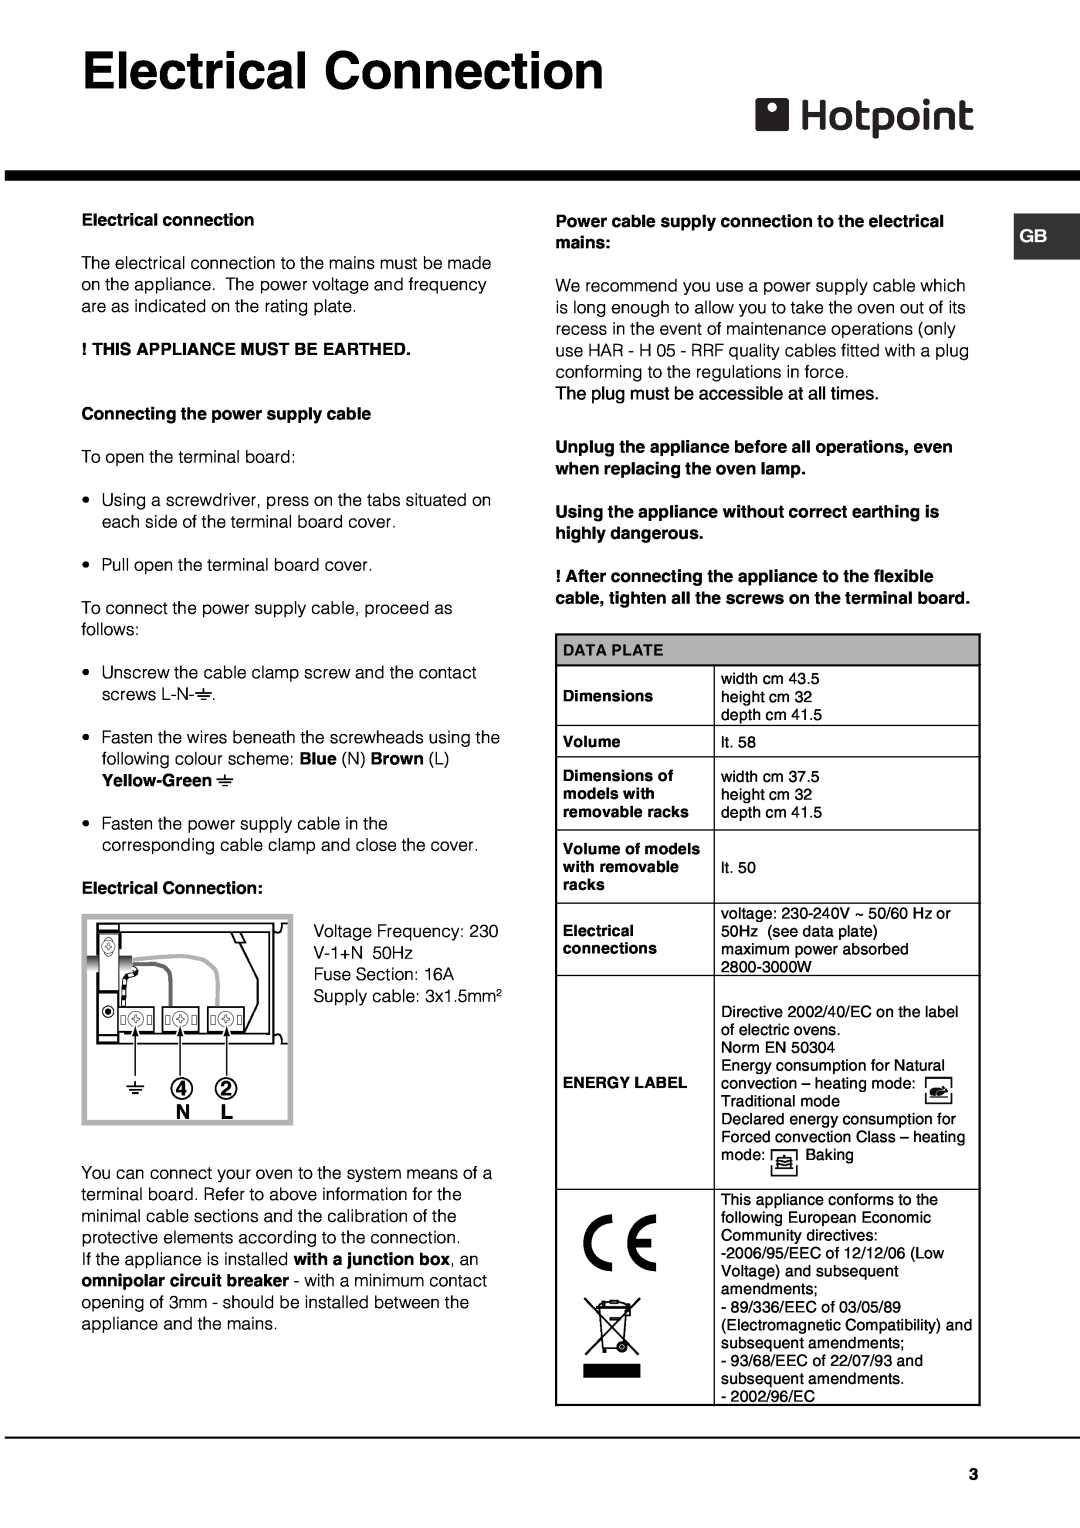 Hotpoint AHP66X/1, SQ661I/1, SE661X/1, SE662K/1, AHP662K/1, AHP662X/1 operating instructions Electrical Connection, 4 2 N L 